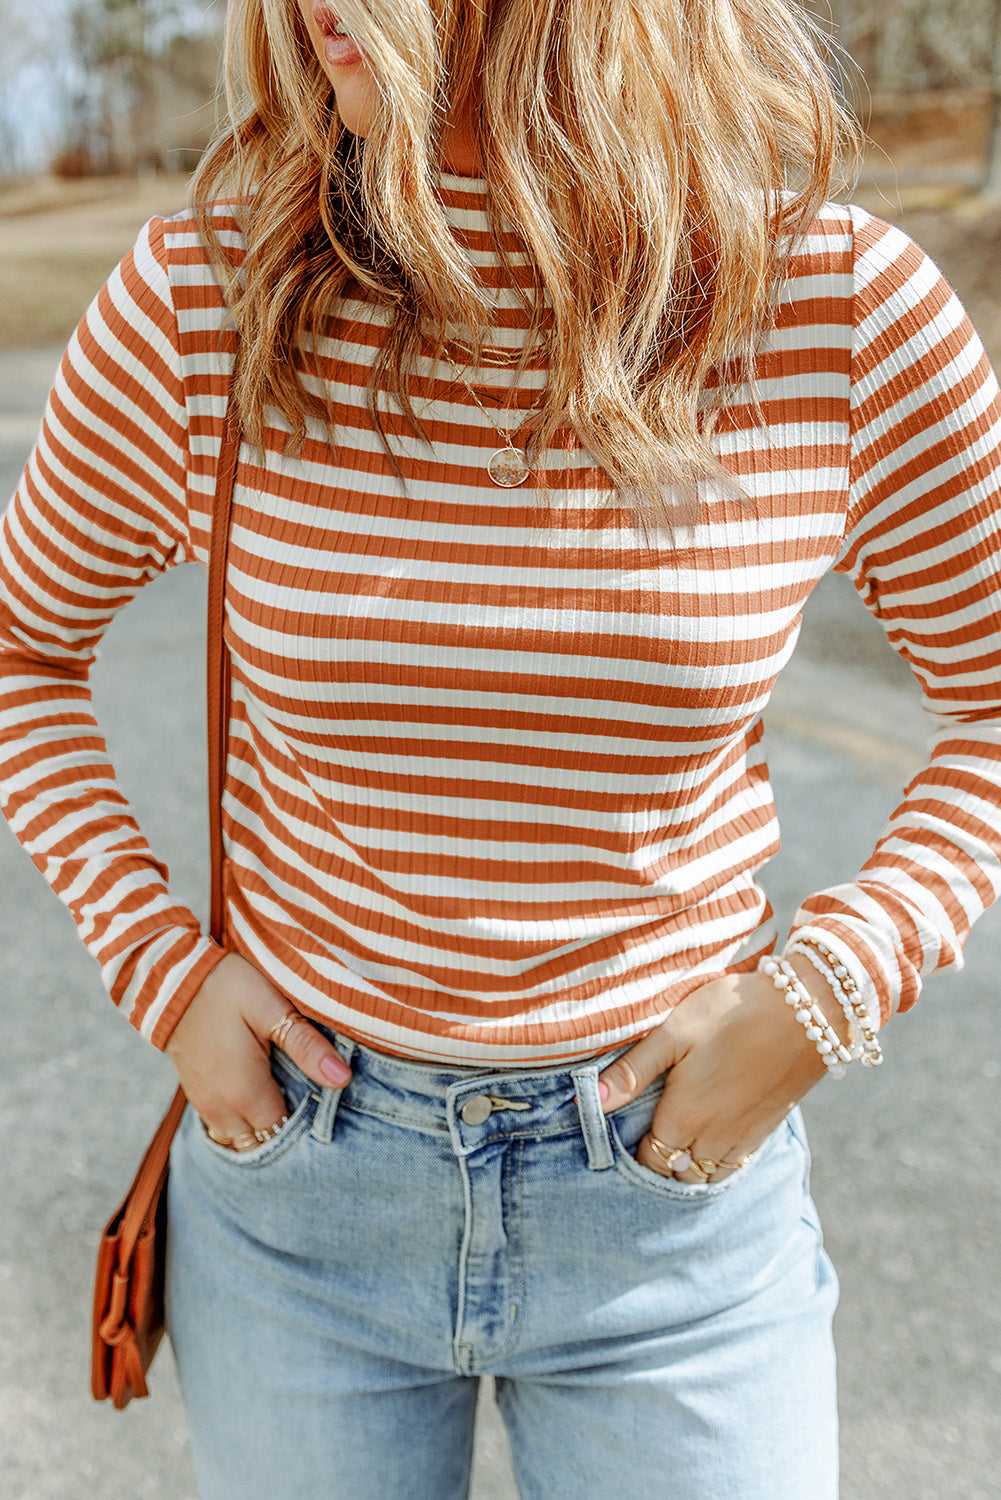 Strawberry Pink Striped Print Textured Knit Long Sleeve Tee